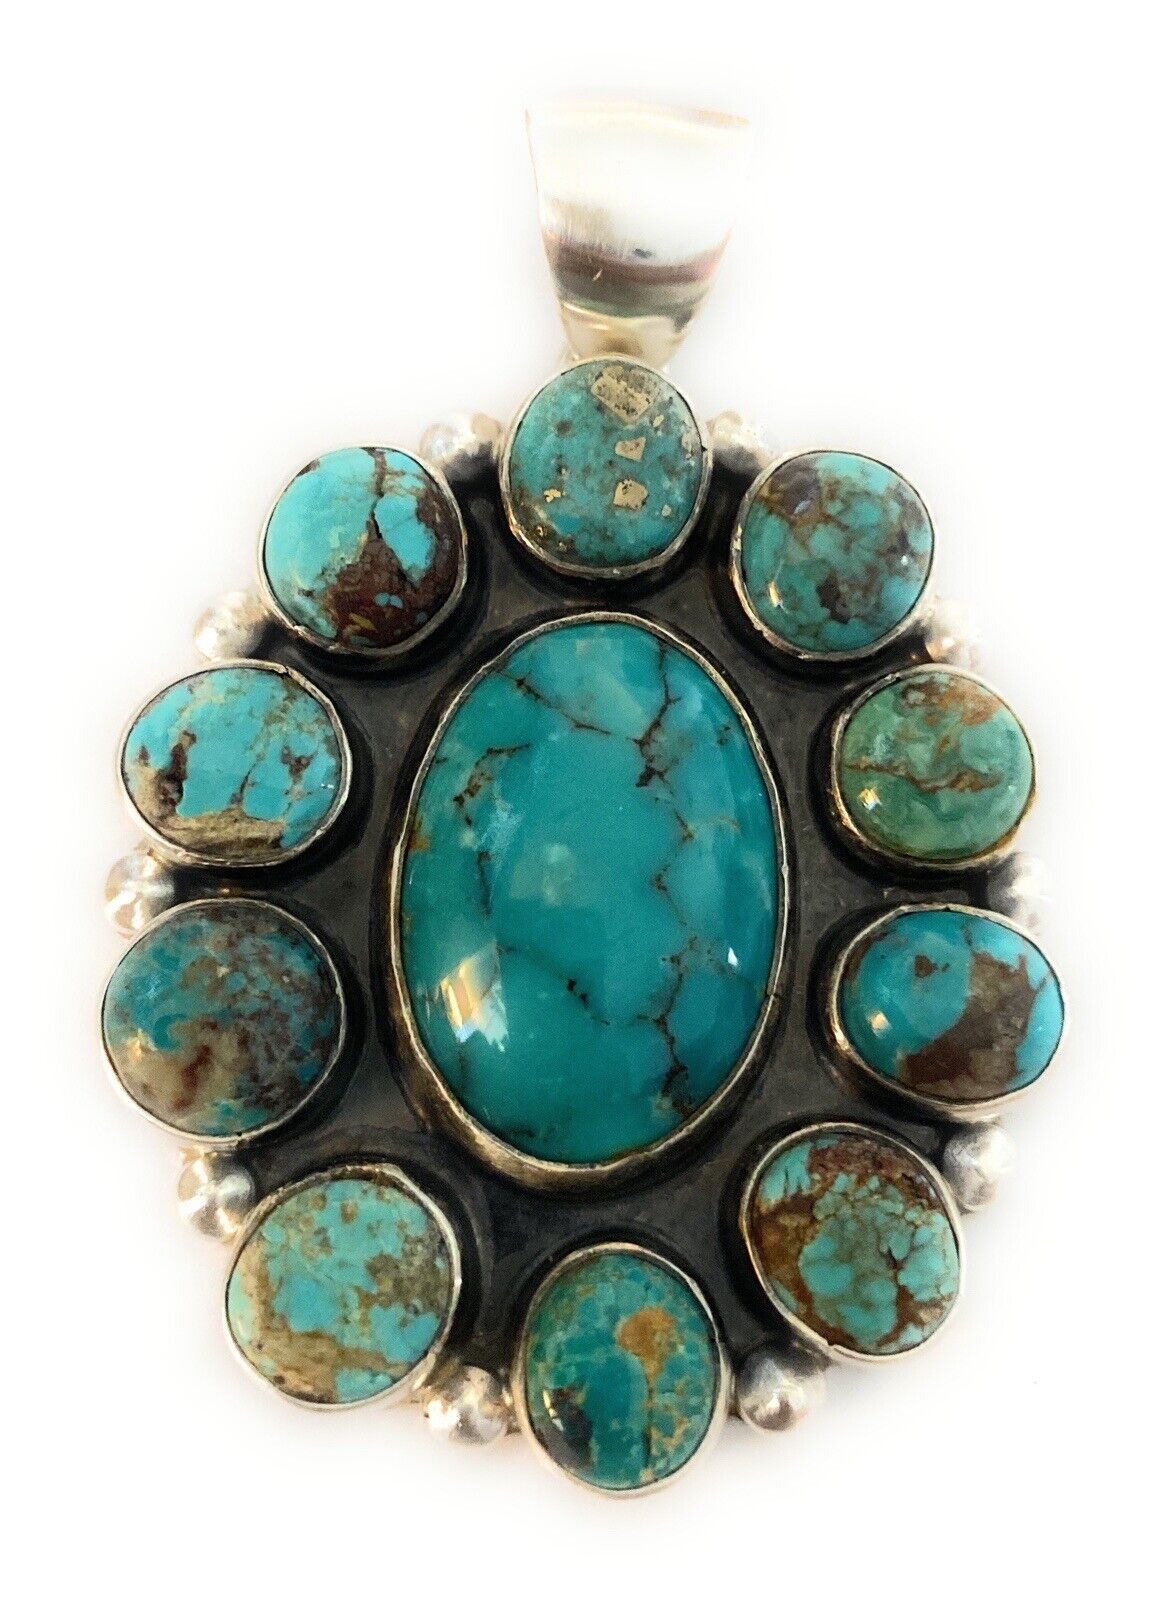 Navajo Sterling Silver & Multi Turquoise Cluster Pendant Signed